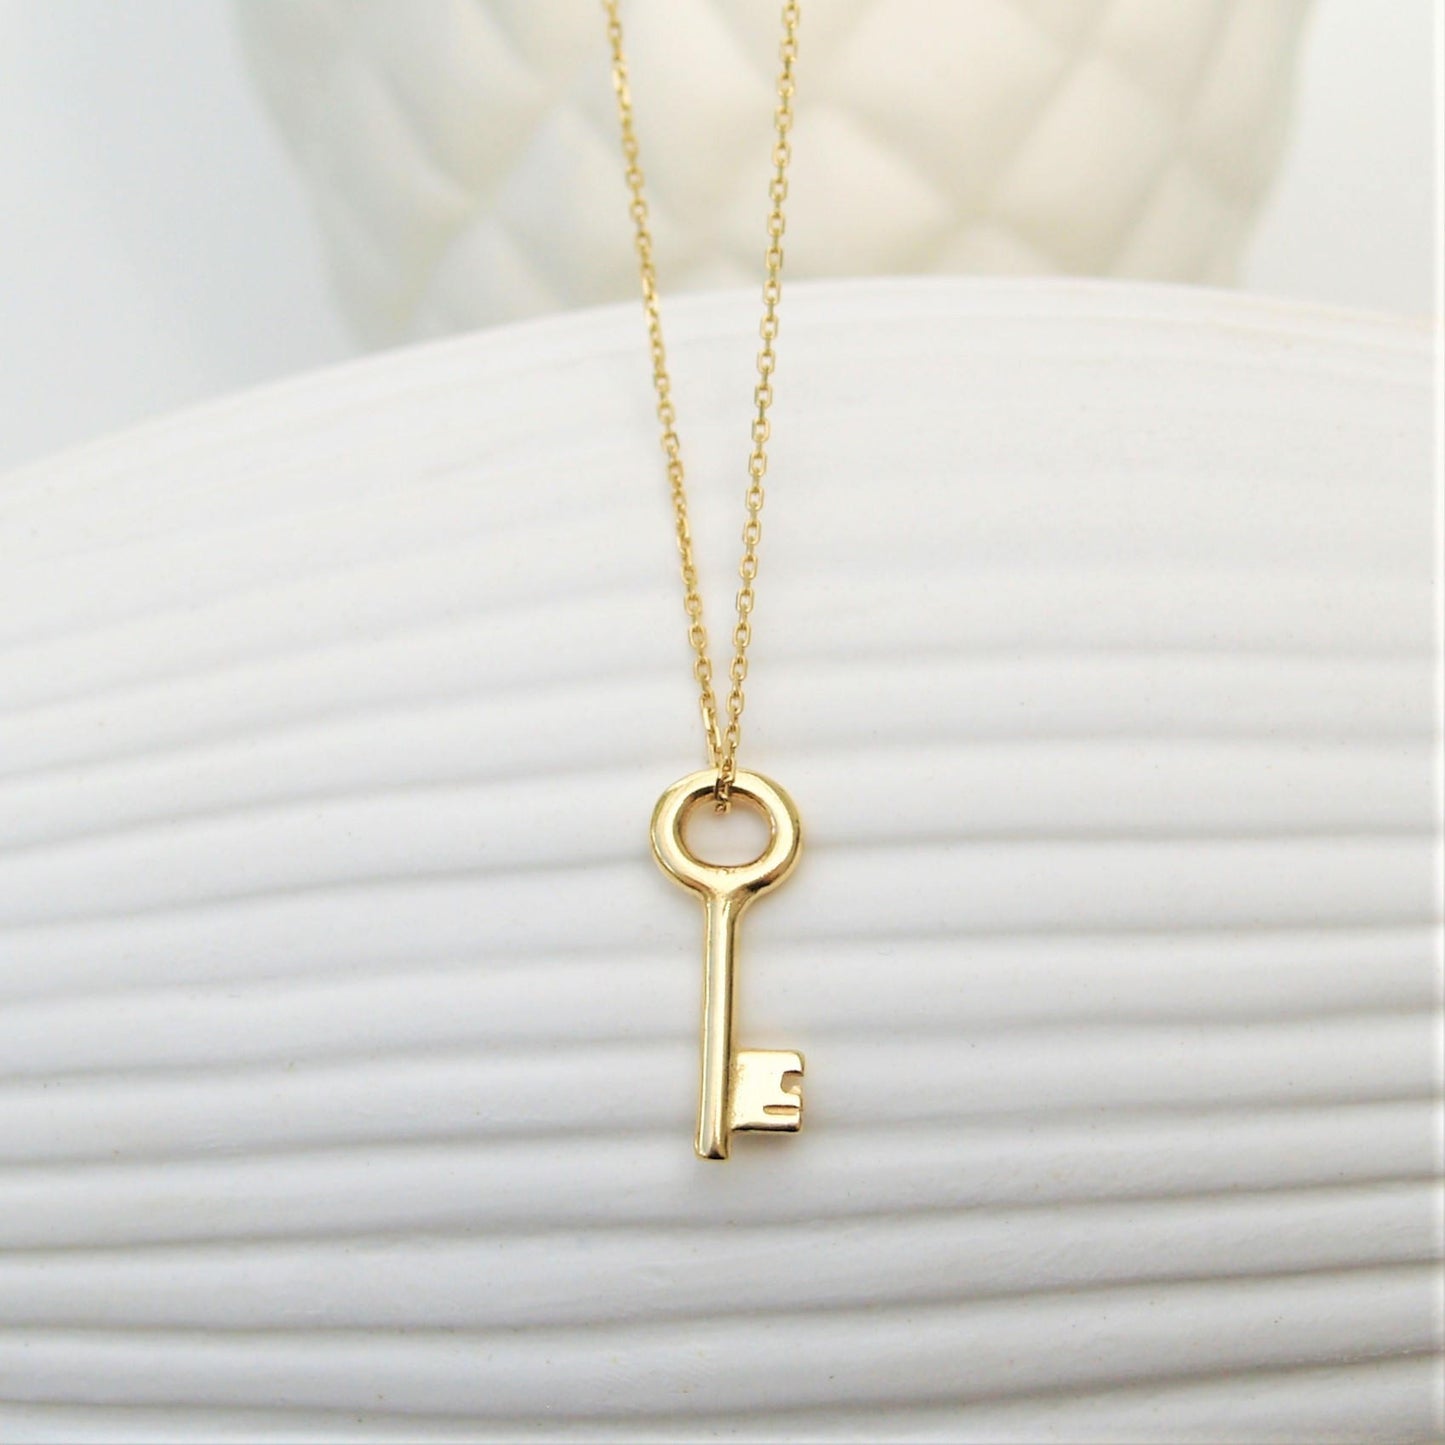 Handmade to order - 18ct solid yellow gold small and dainty key charm pendant and chain